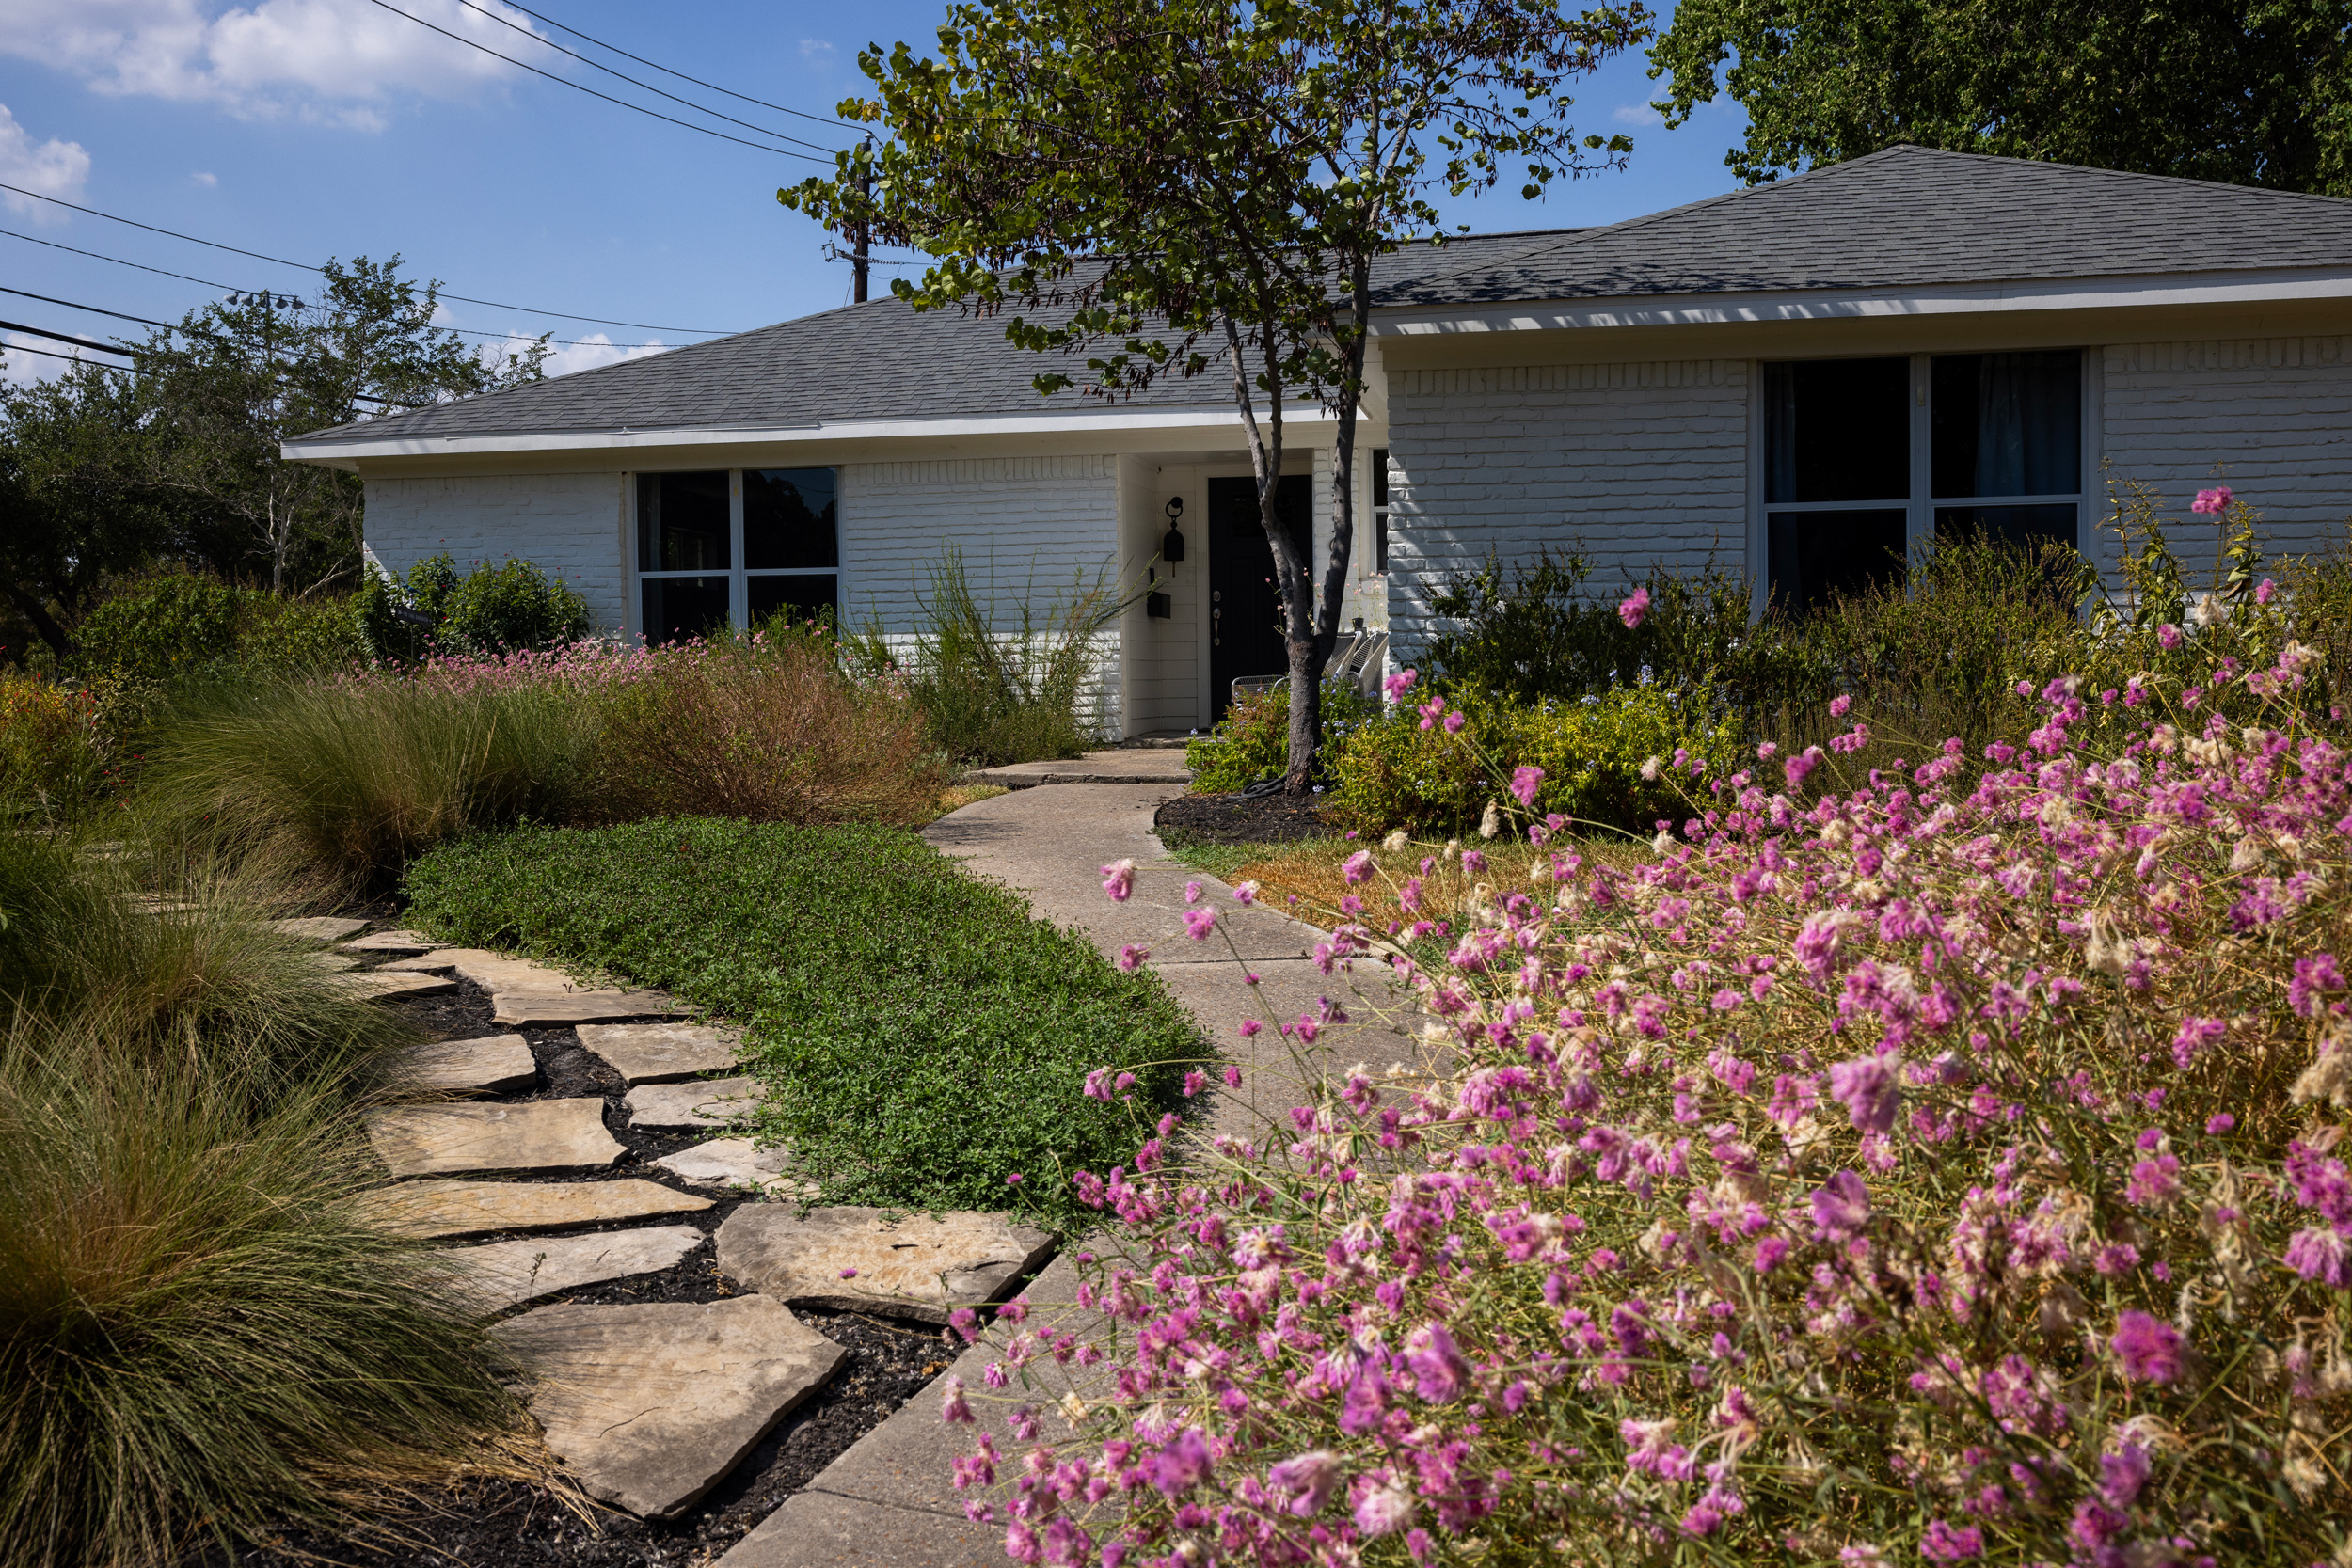 Native plants fill Claudia Schnelle’s front yard in Houston during the hot summer.